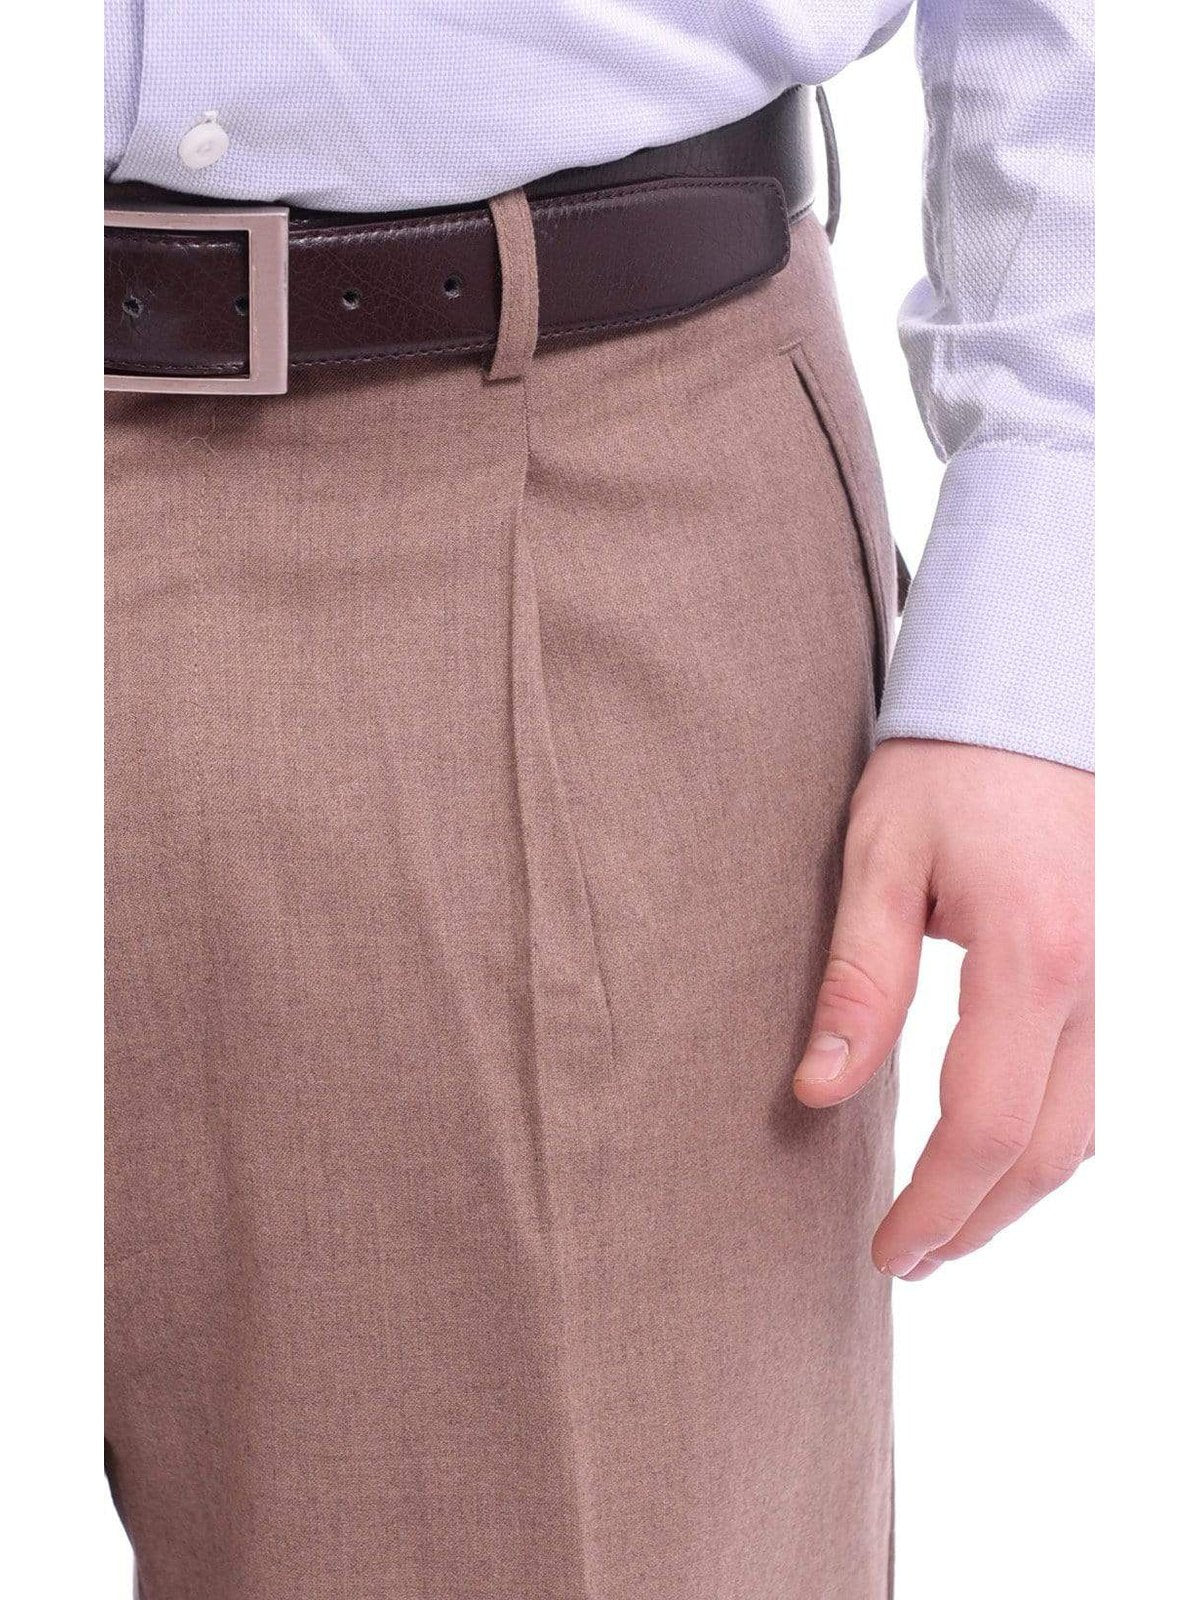 Apollo King PANTS Apollo King Classic Fit Solid Taupe Single Pleated Wide Leg Wool Dress Pants